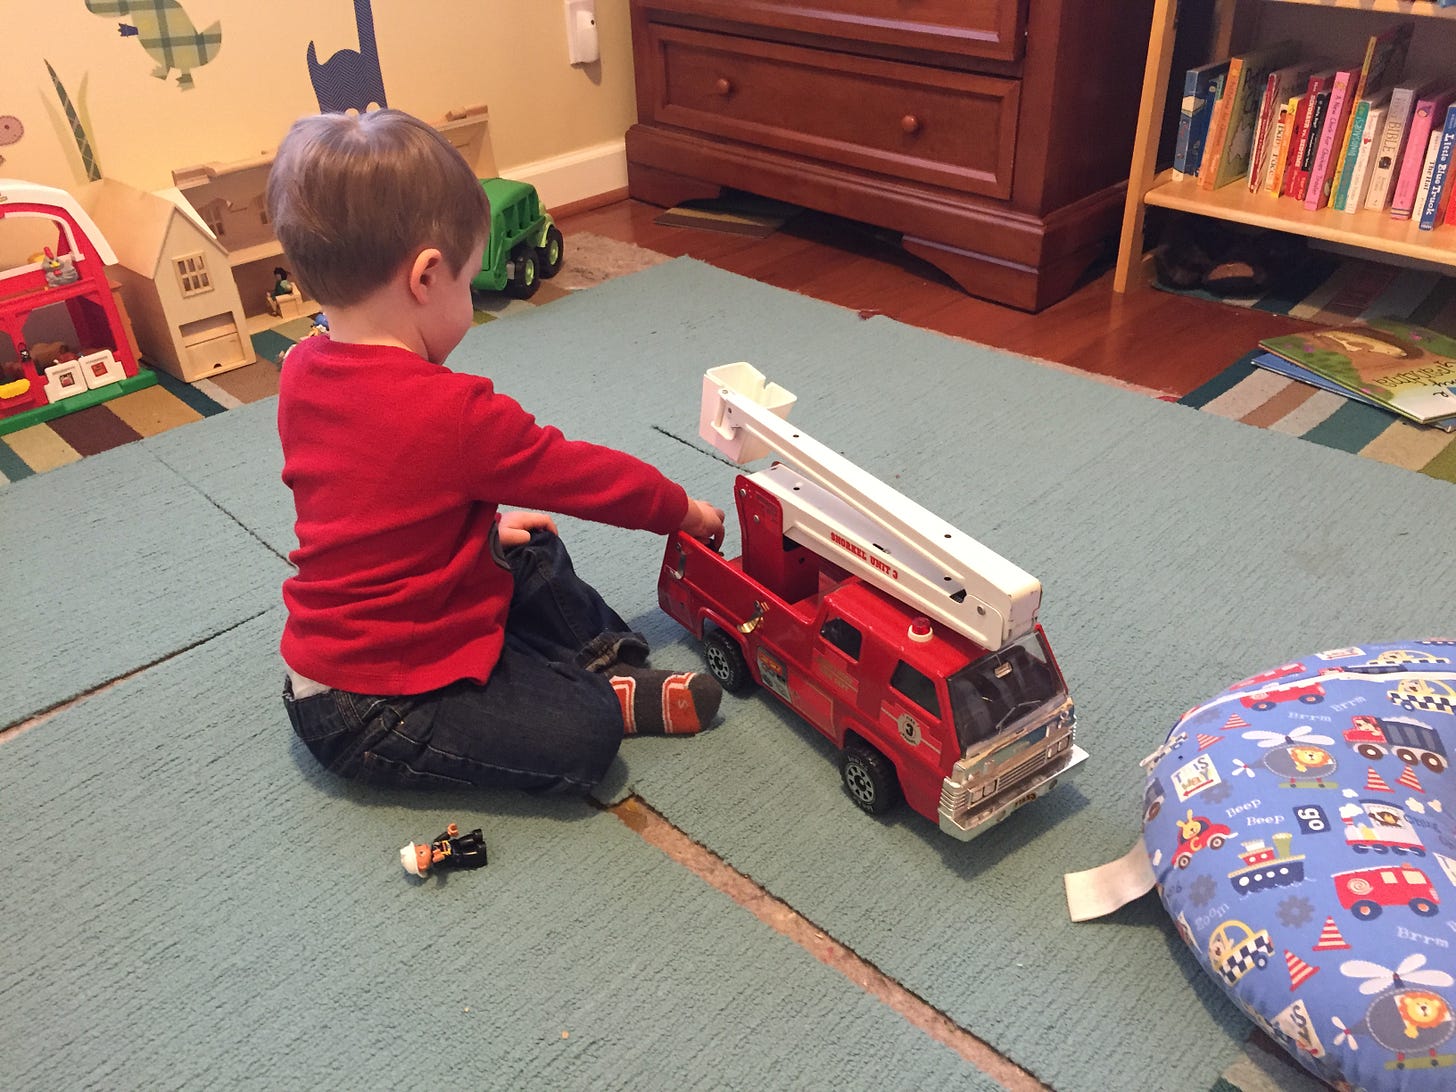 A white boy in a red sweater sitting on the floor and playing with a toy firetruck